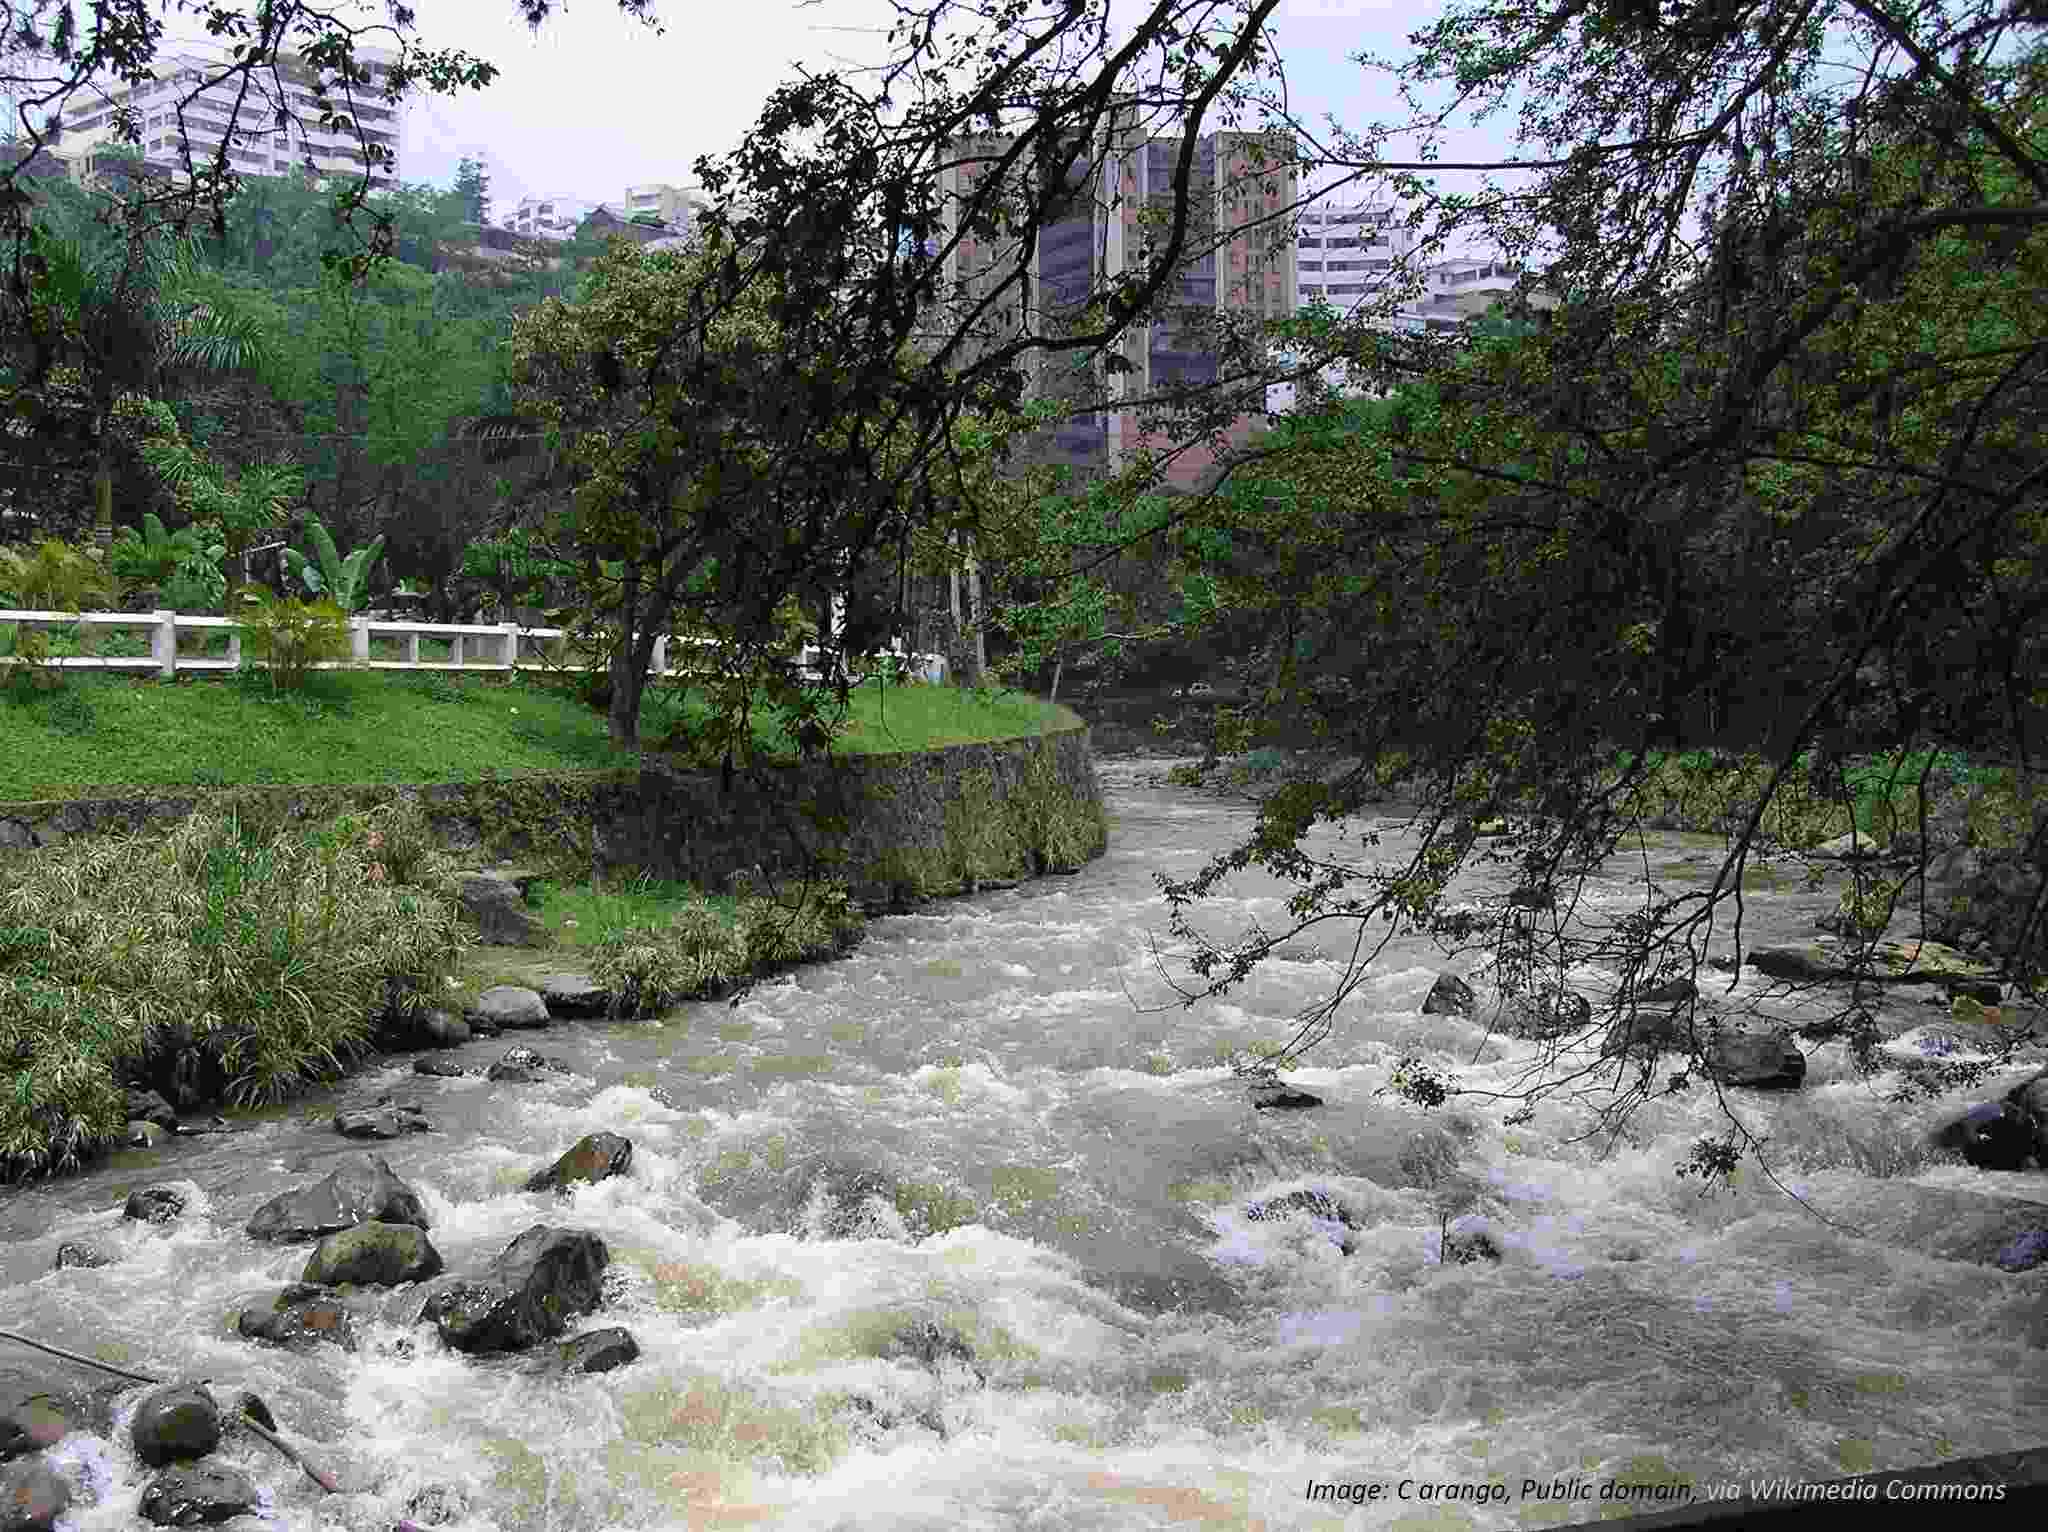 View from a bridge crossing the Cali River, a steep bank is visible in the foreground and the river quickly flowing away from viewpoint. High rise buildings are visible just beyond. 